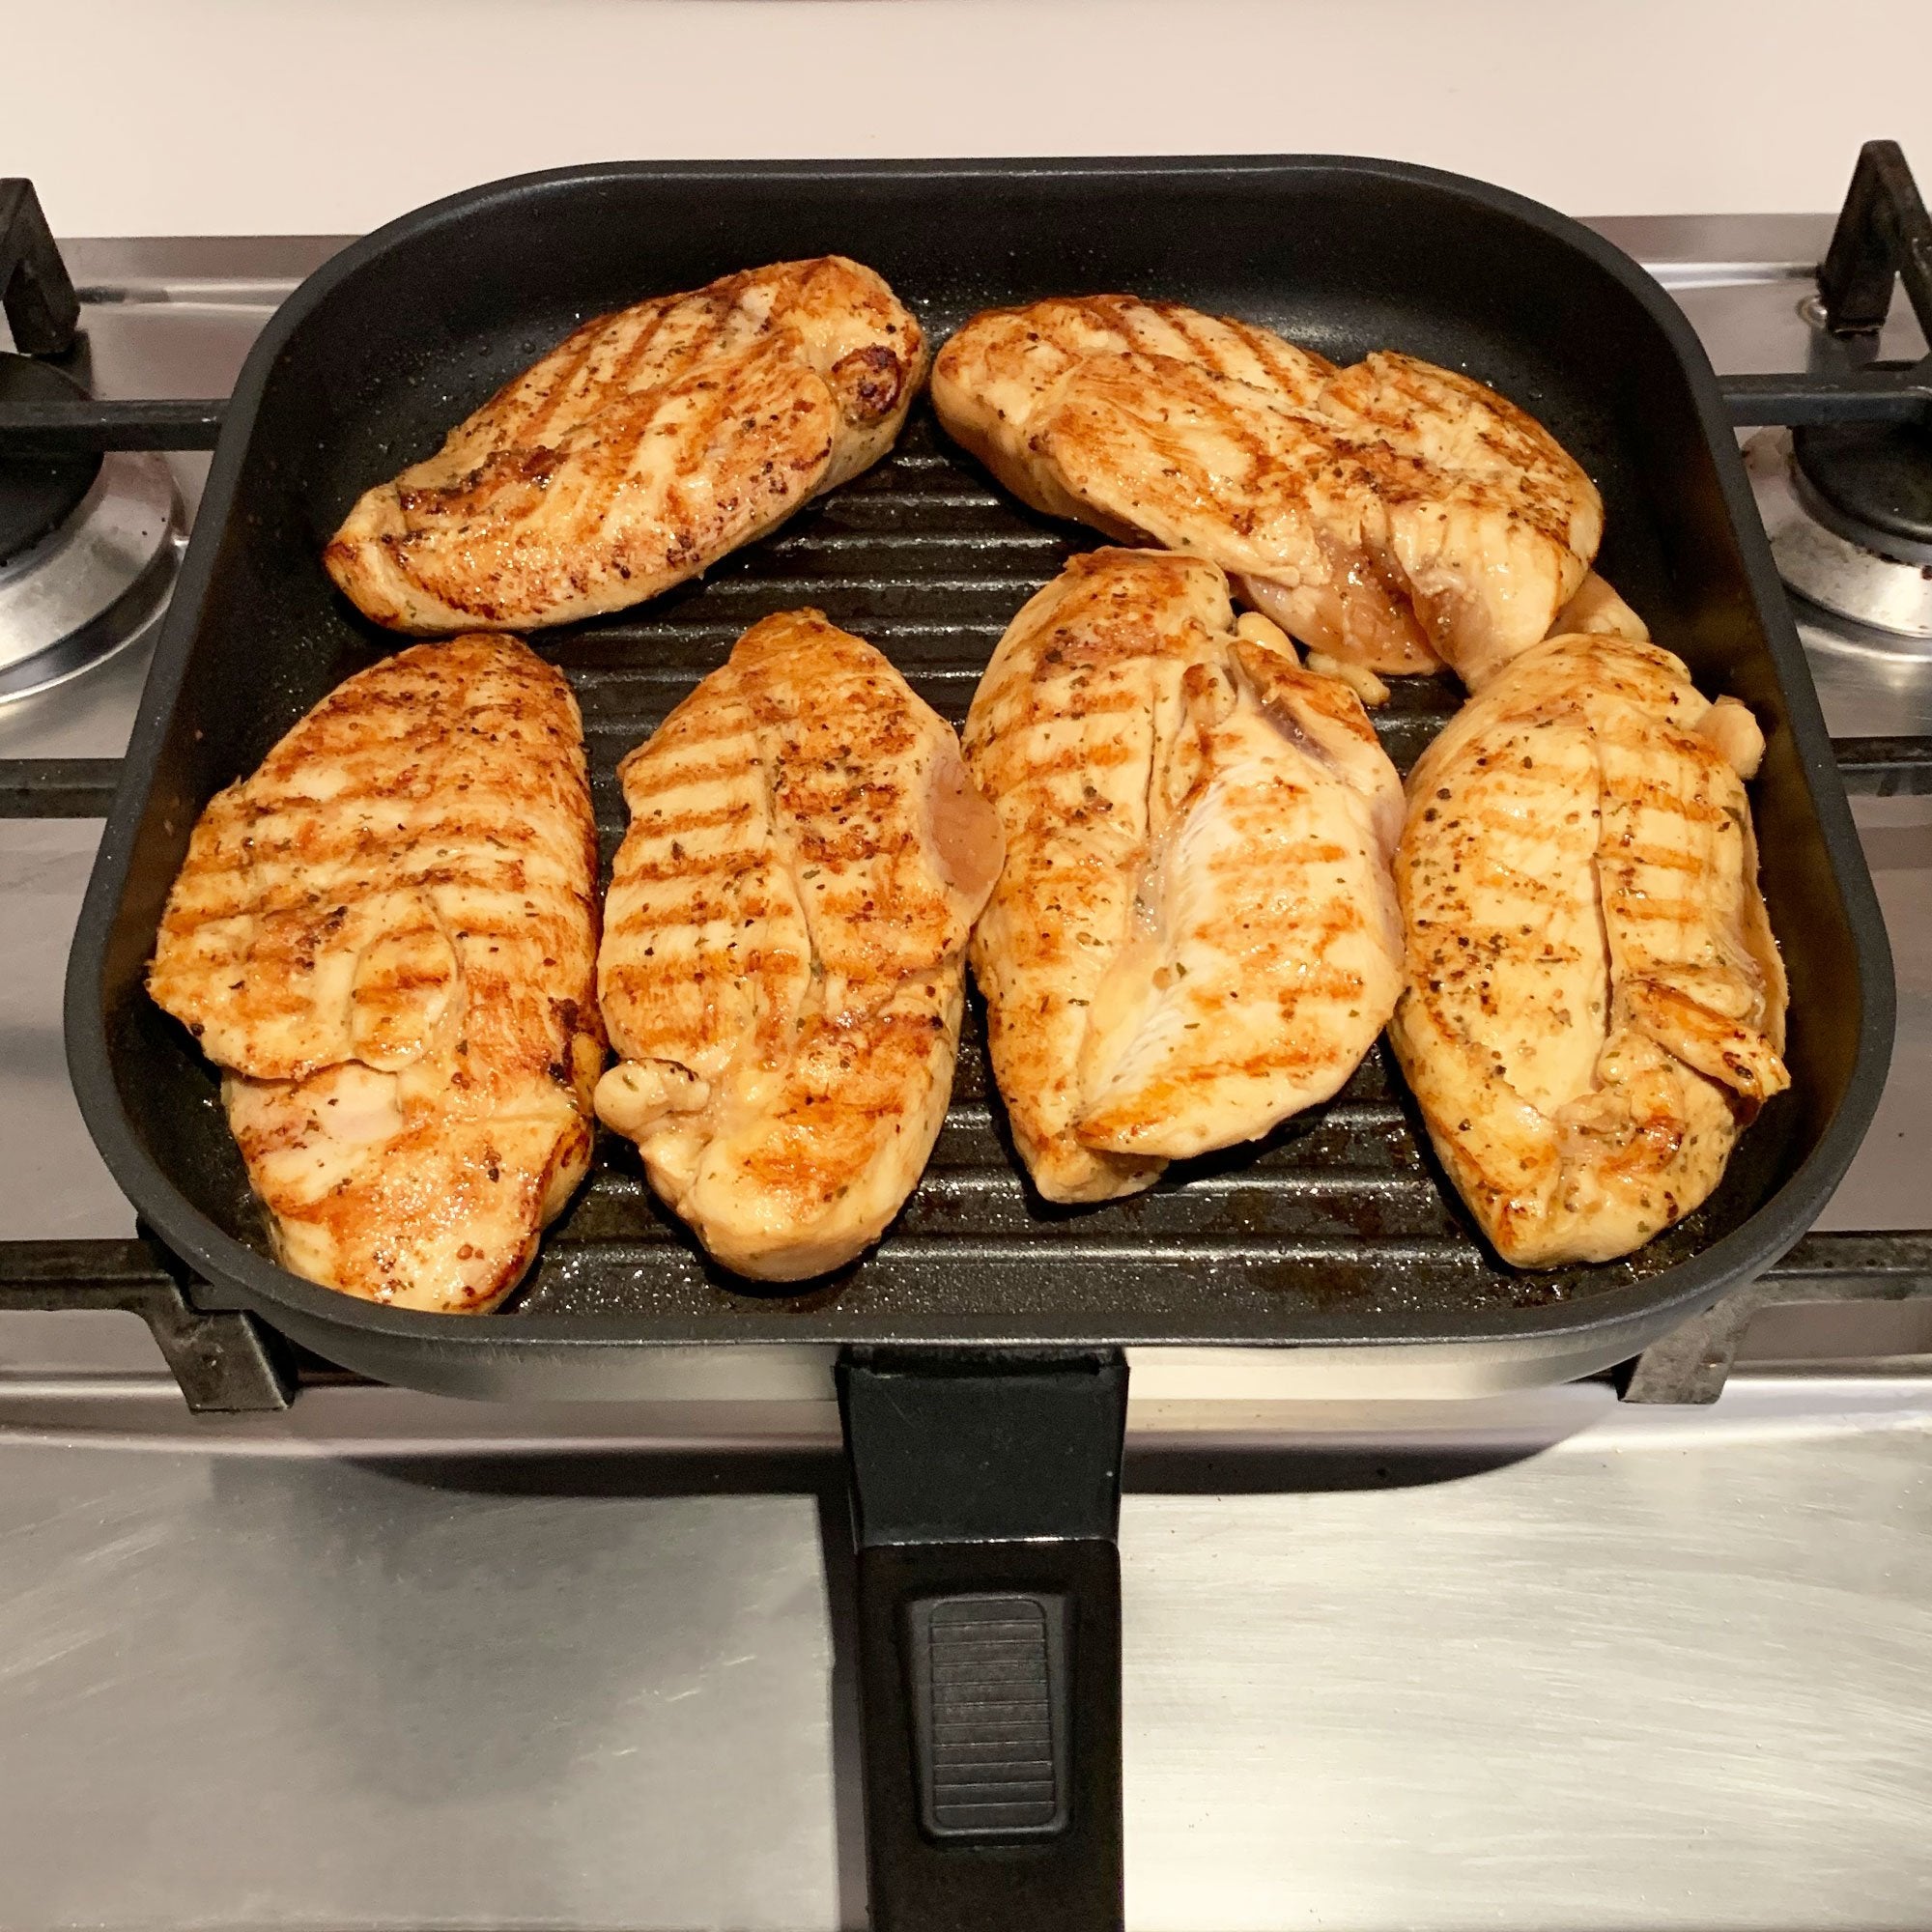 The Anything Pan - Non-stick Griddle Pan with Detachable Handle